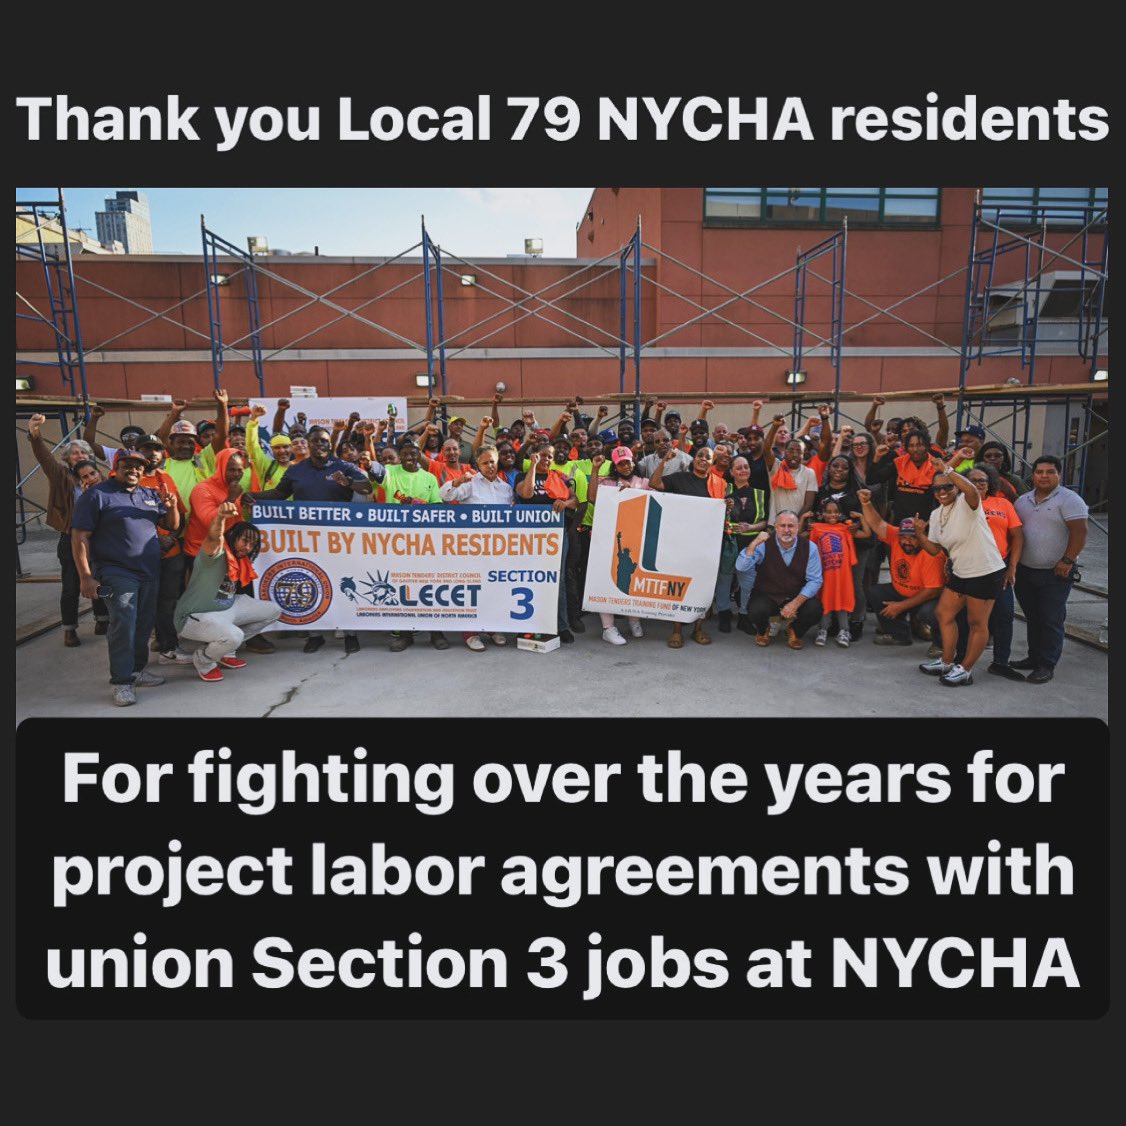 #Local79IsSection3 ✊ NYCHA recently signed a new collective bargaining agreement that will allow projects to move forward and allow residents to access career opportunities in the unionized construction trades.